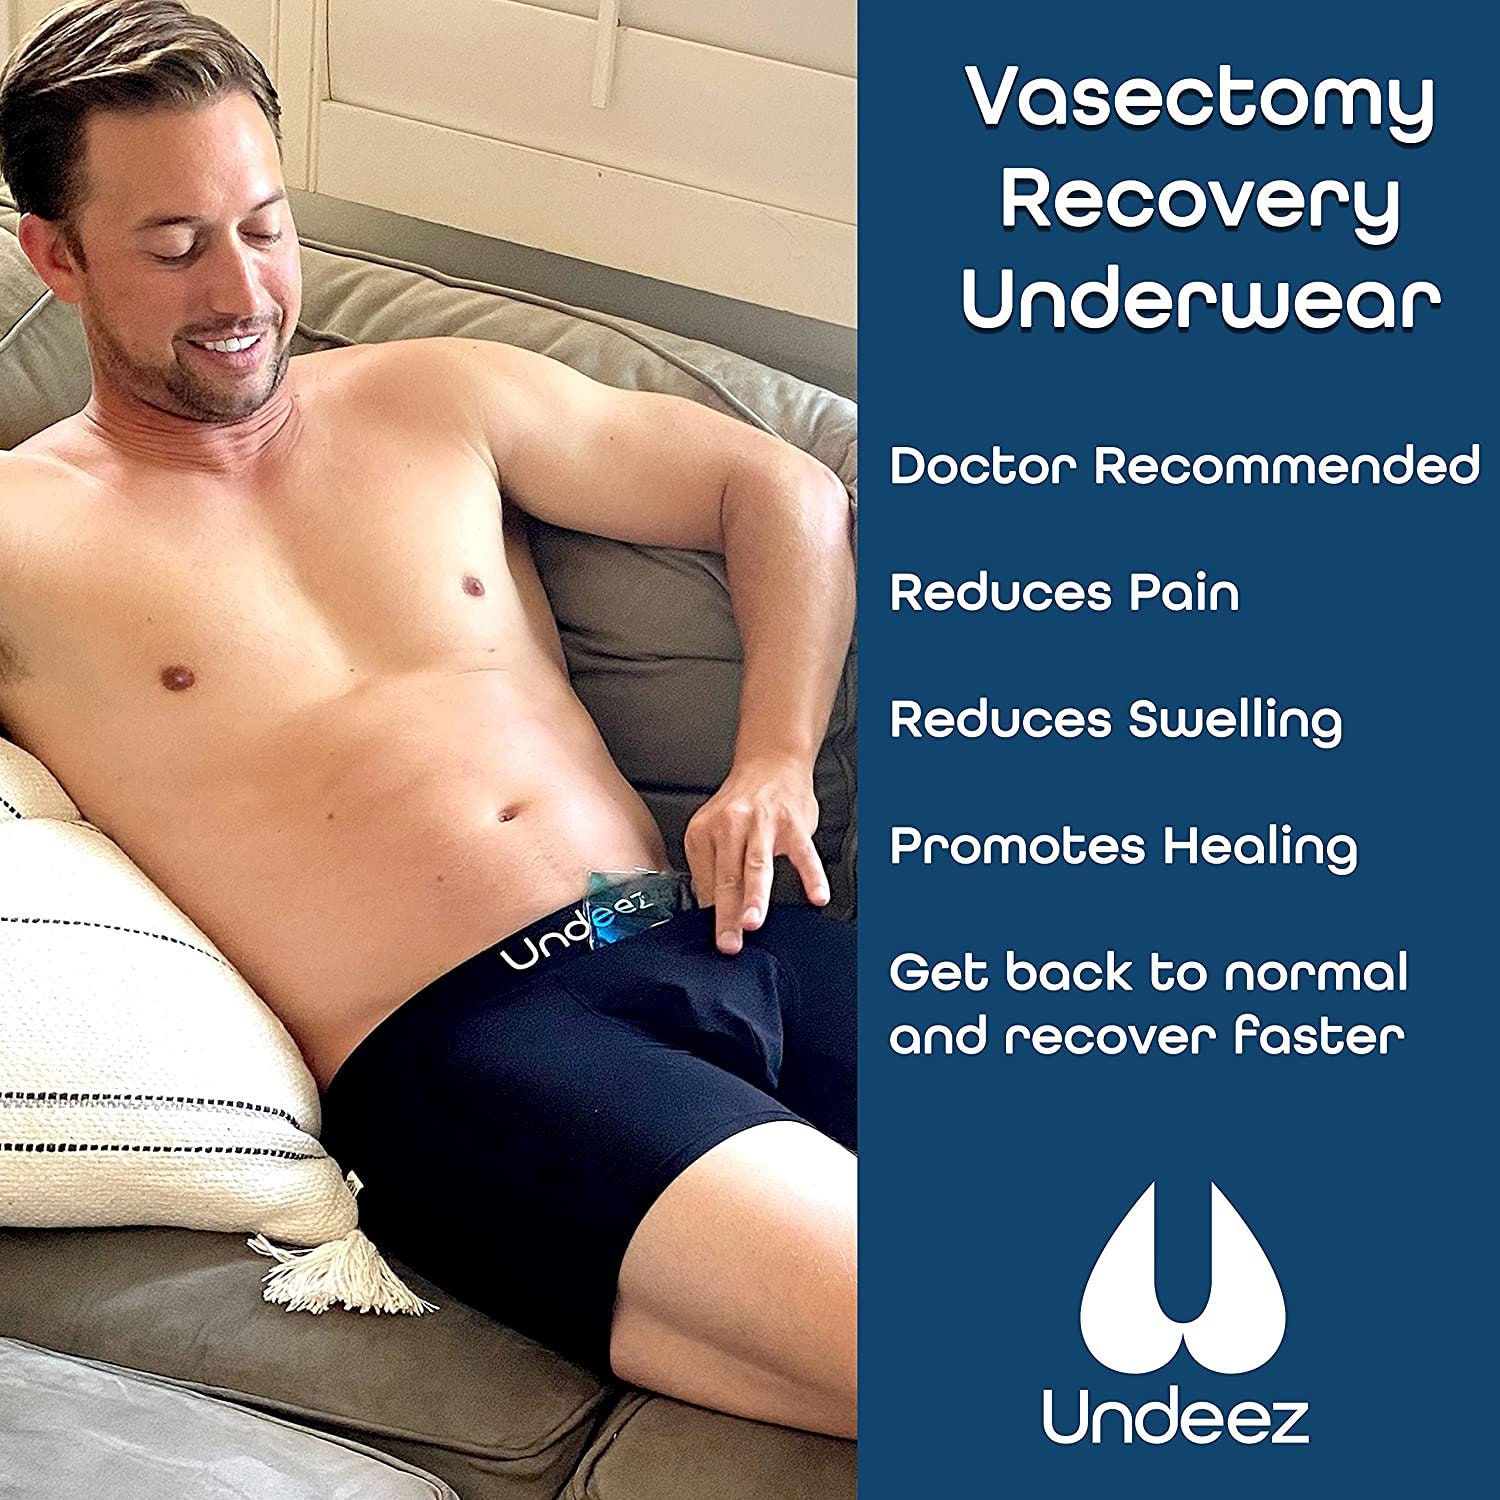 Undeez Vasectomy Underwear Comes With 2-custom Fit Ice Packs and